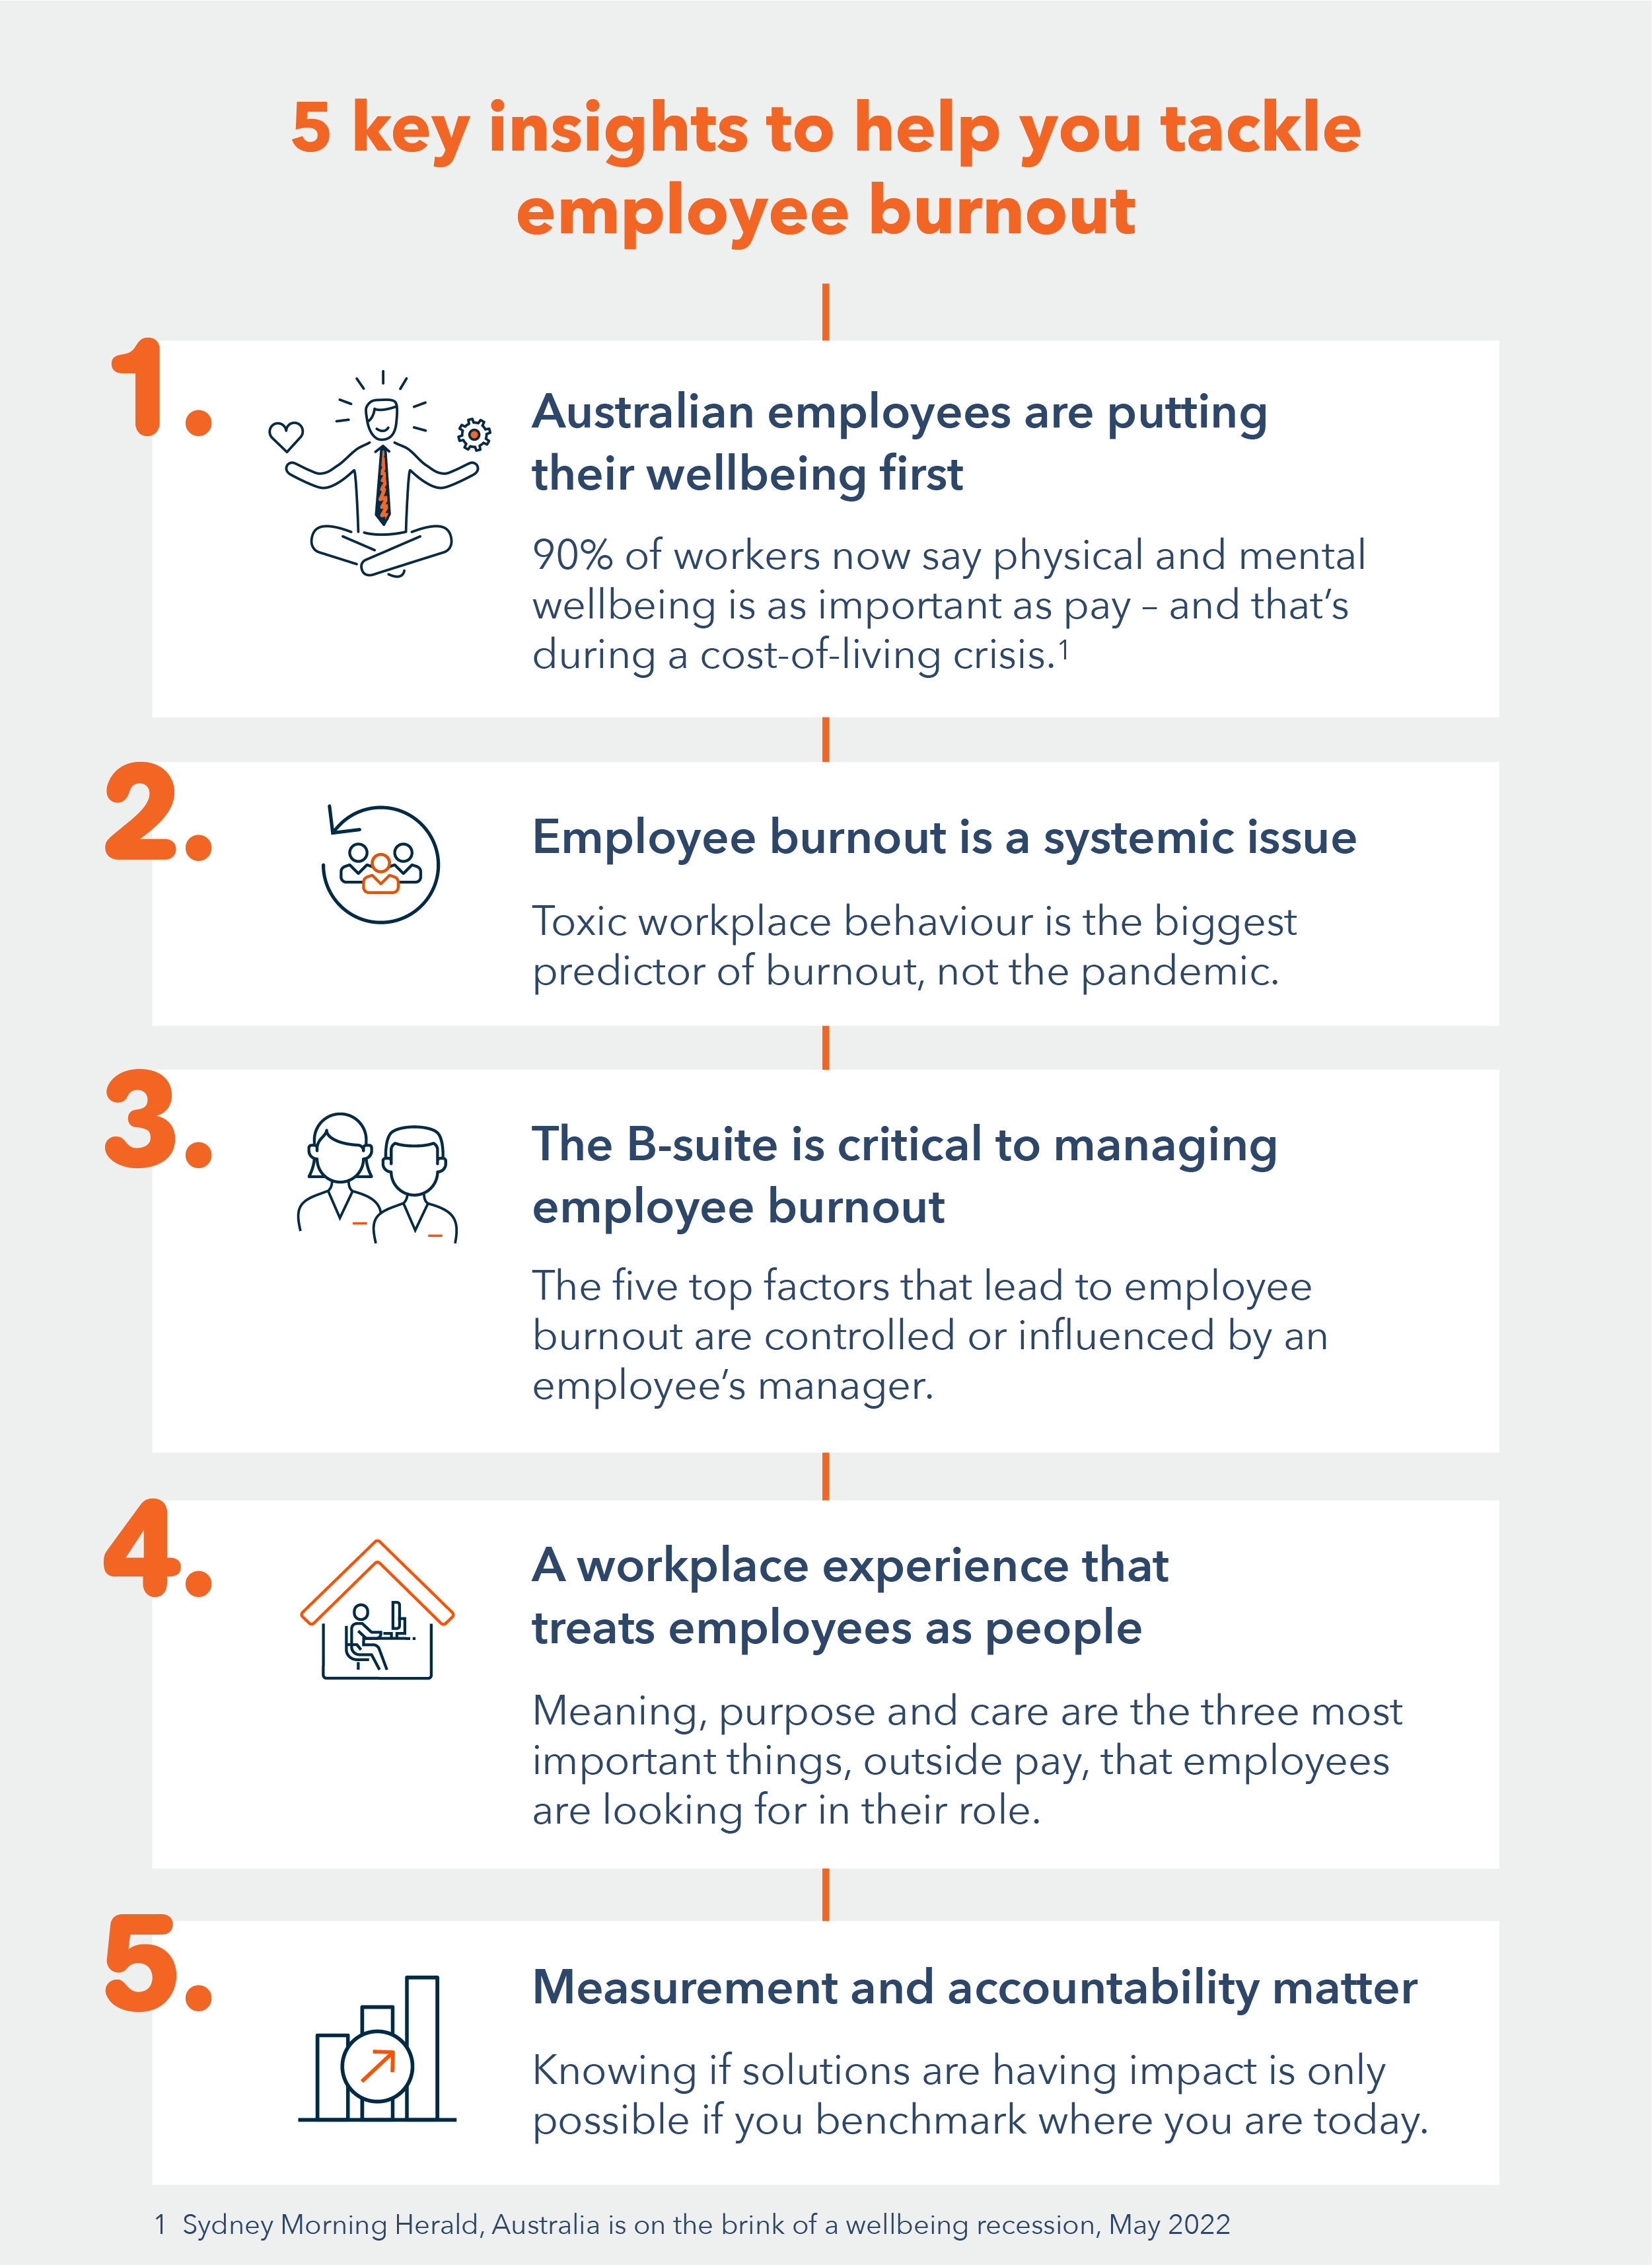 listicle on 5 insights to help you tackle employee burnout